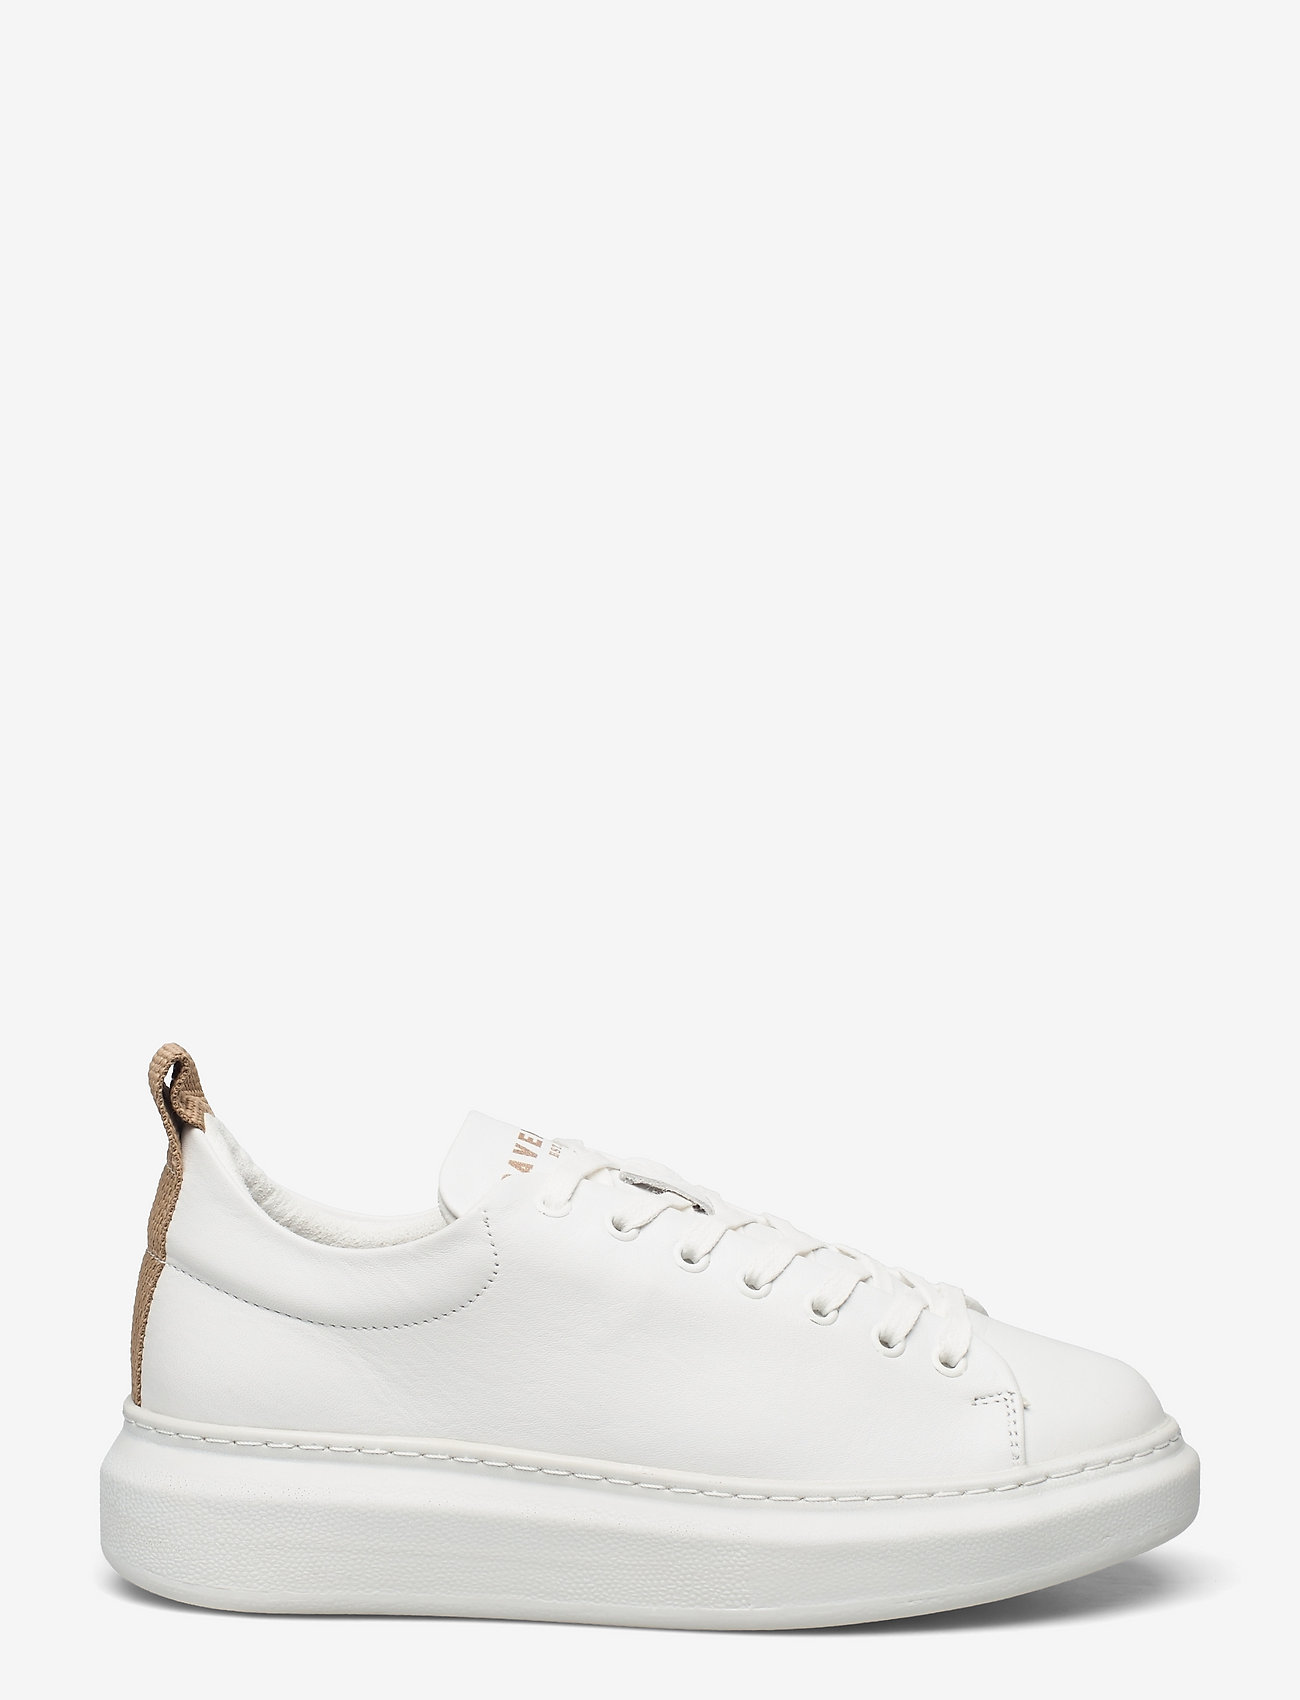 Pavement - Dee color - lave sneakers - white/beige - 1